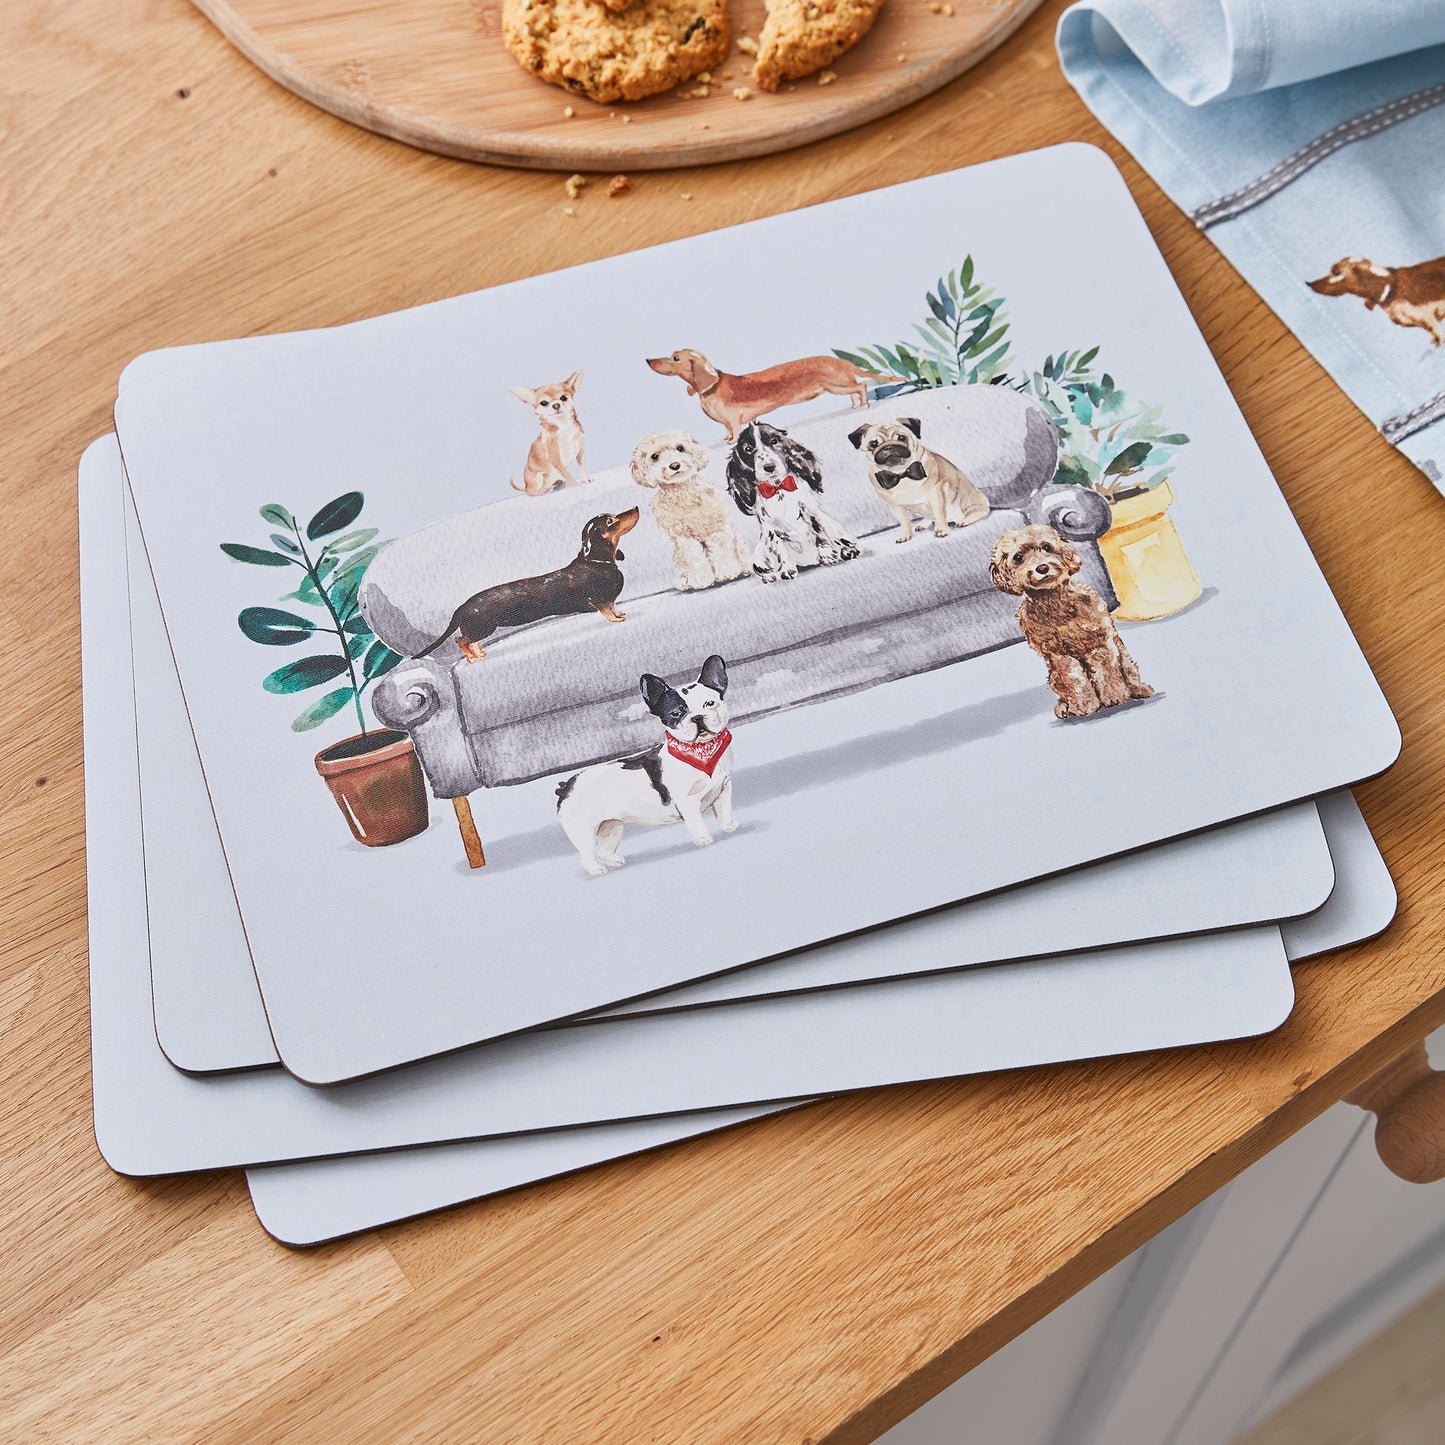 TableMats from the coordinating range of kitchenware and textiles from cooksmart.